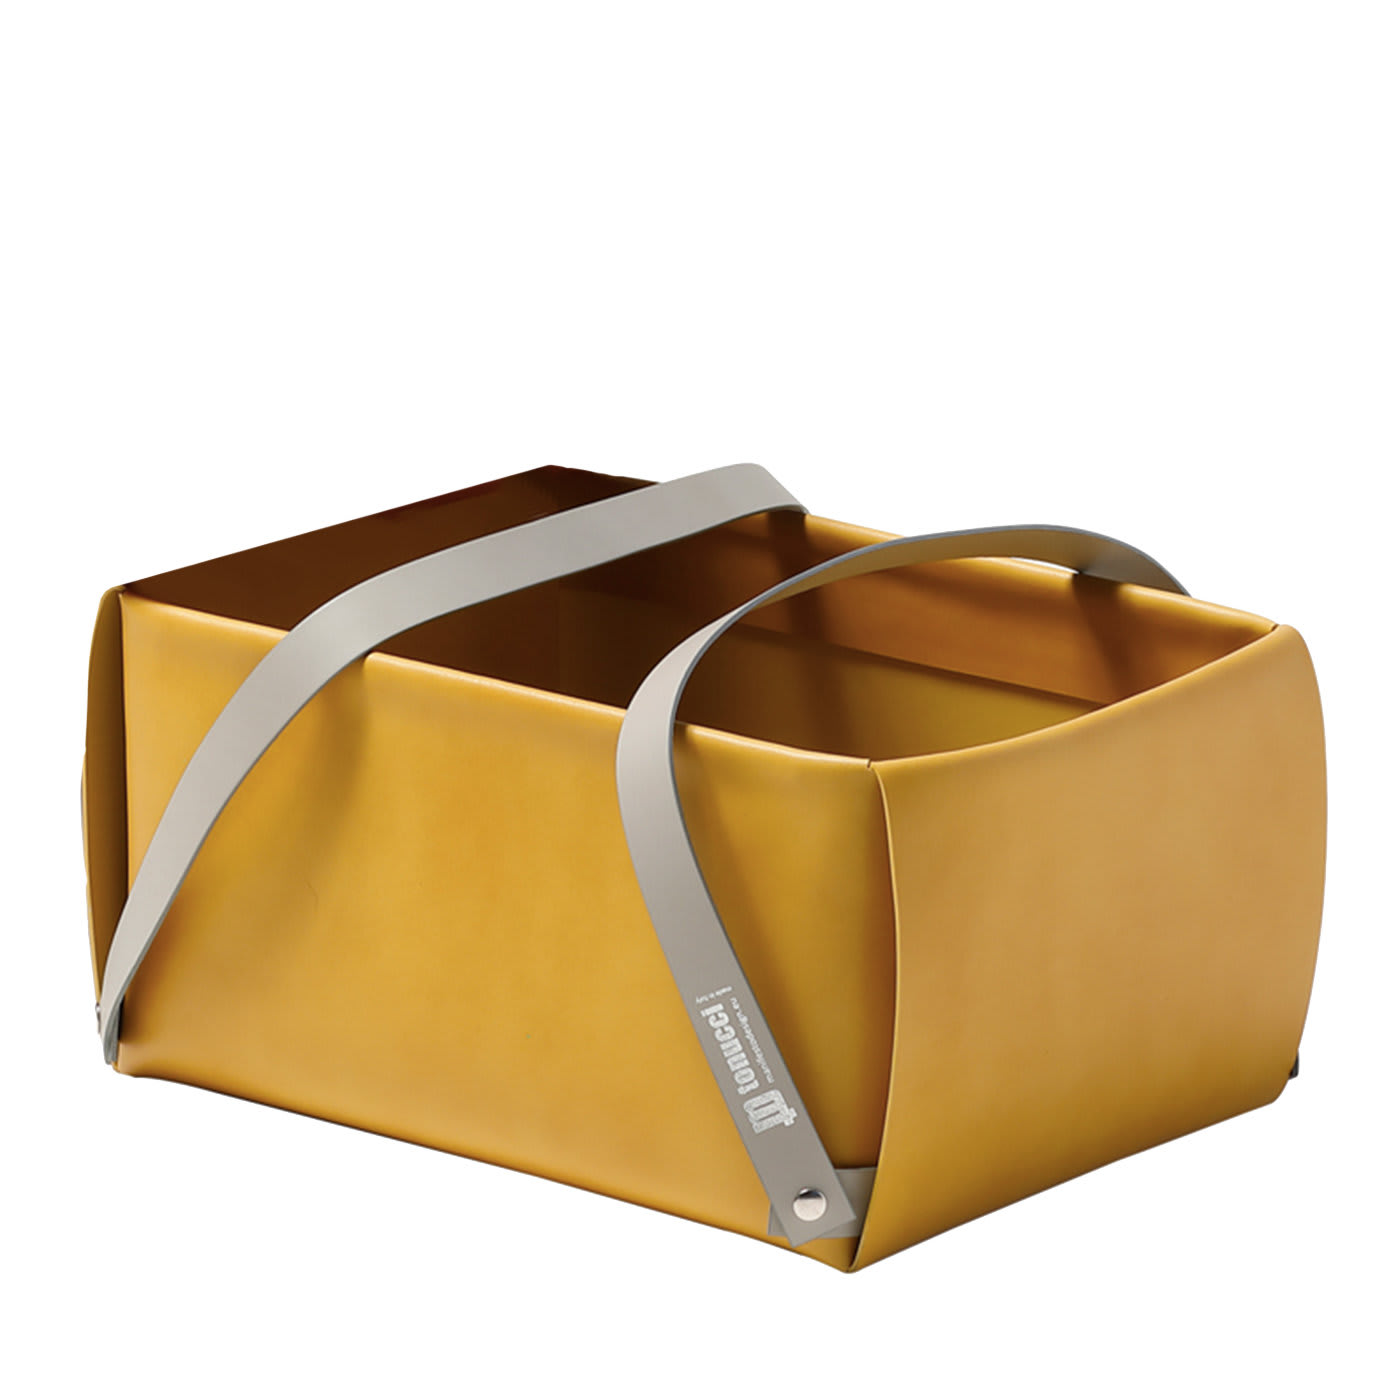 Lullabao Yellow Leather Basket with Handles by Viola Tonucci - Manifestodesign